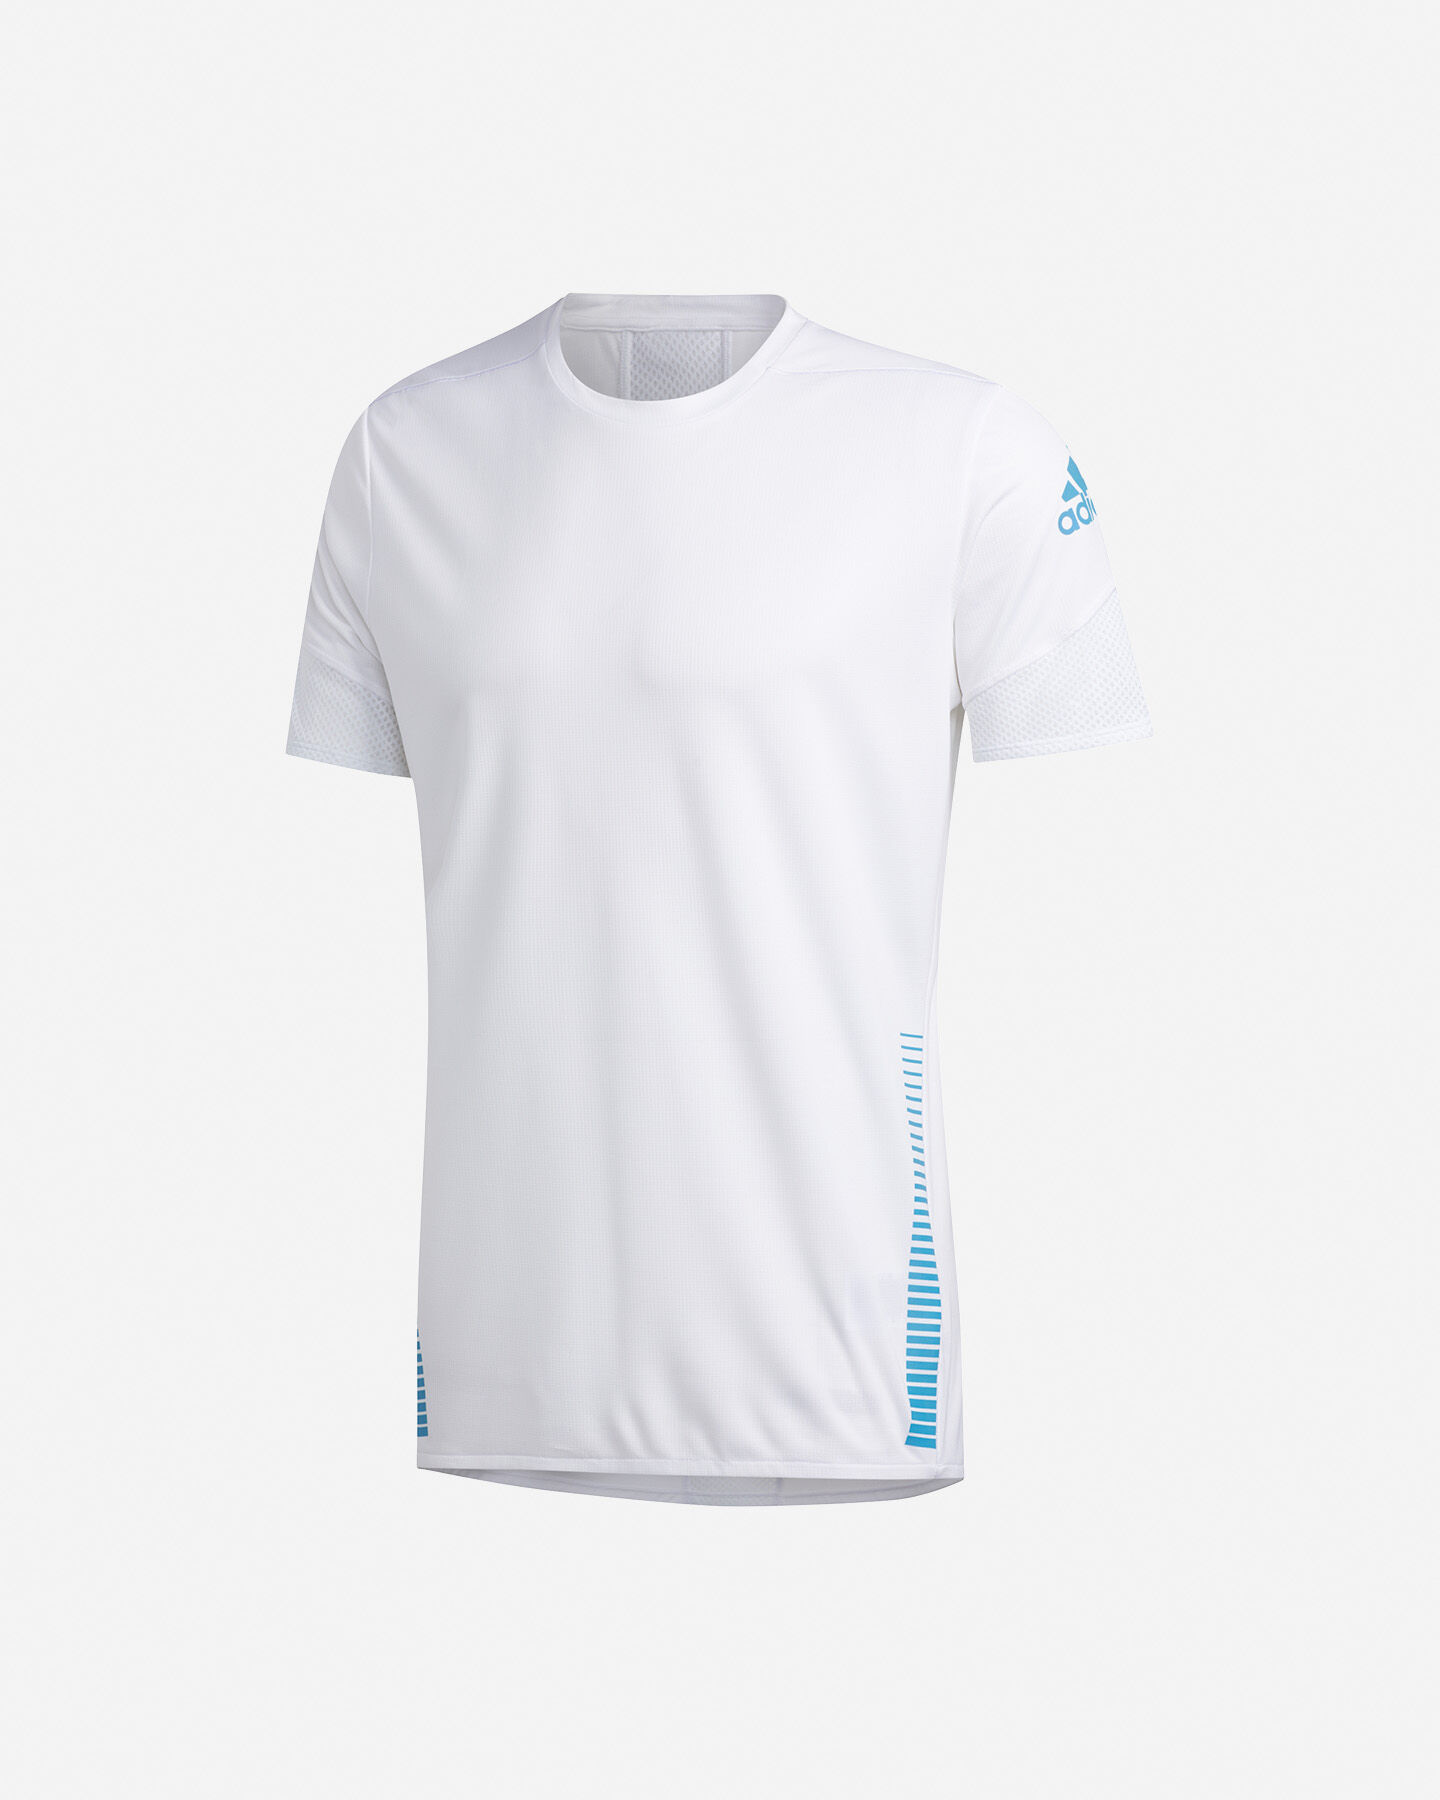  T-Shirt running ADIDAS 25/7 RISE UP N RUN PARLEY M S5147279|UNI|S scatto 0